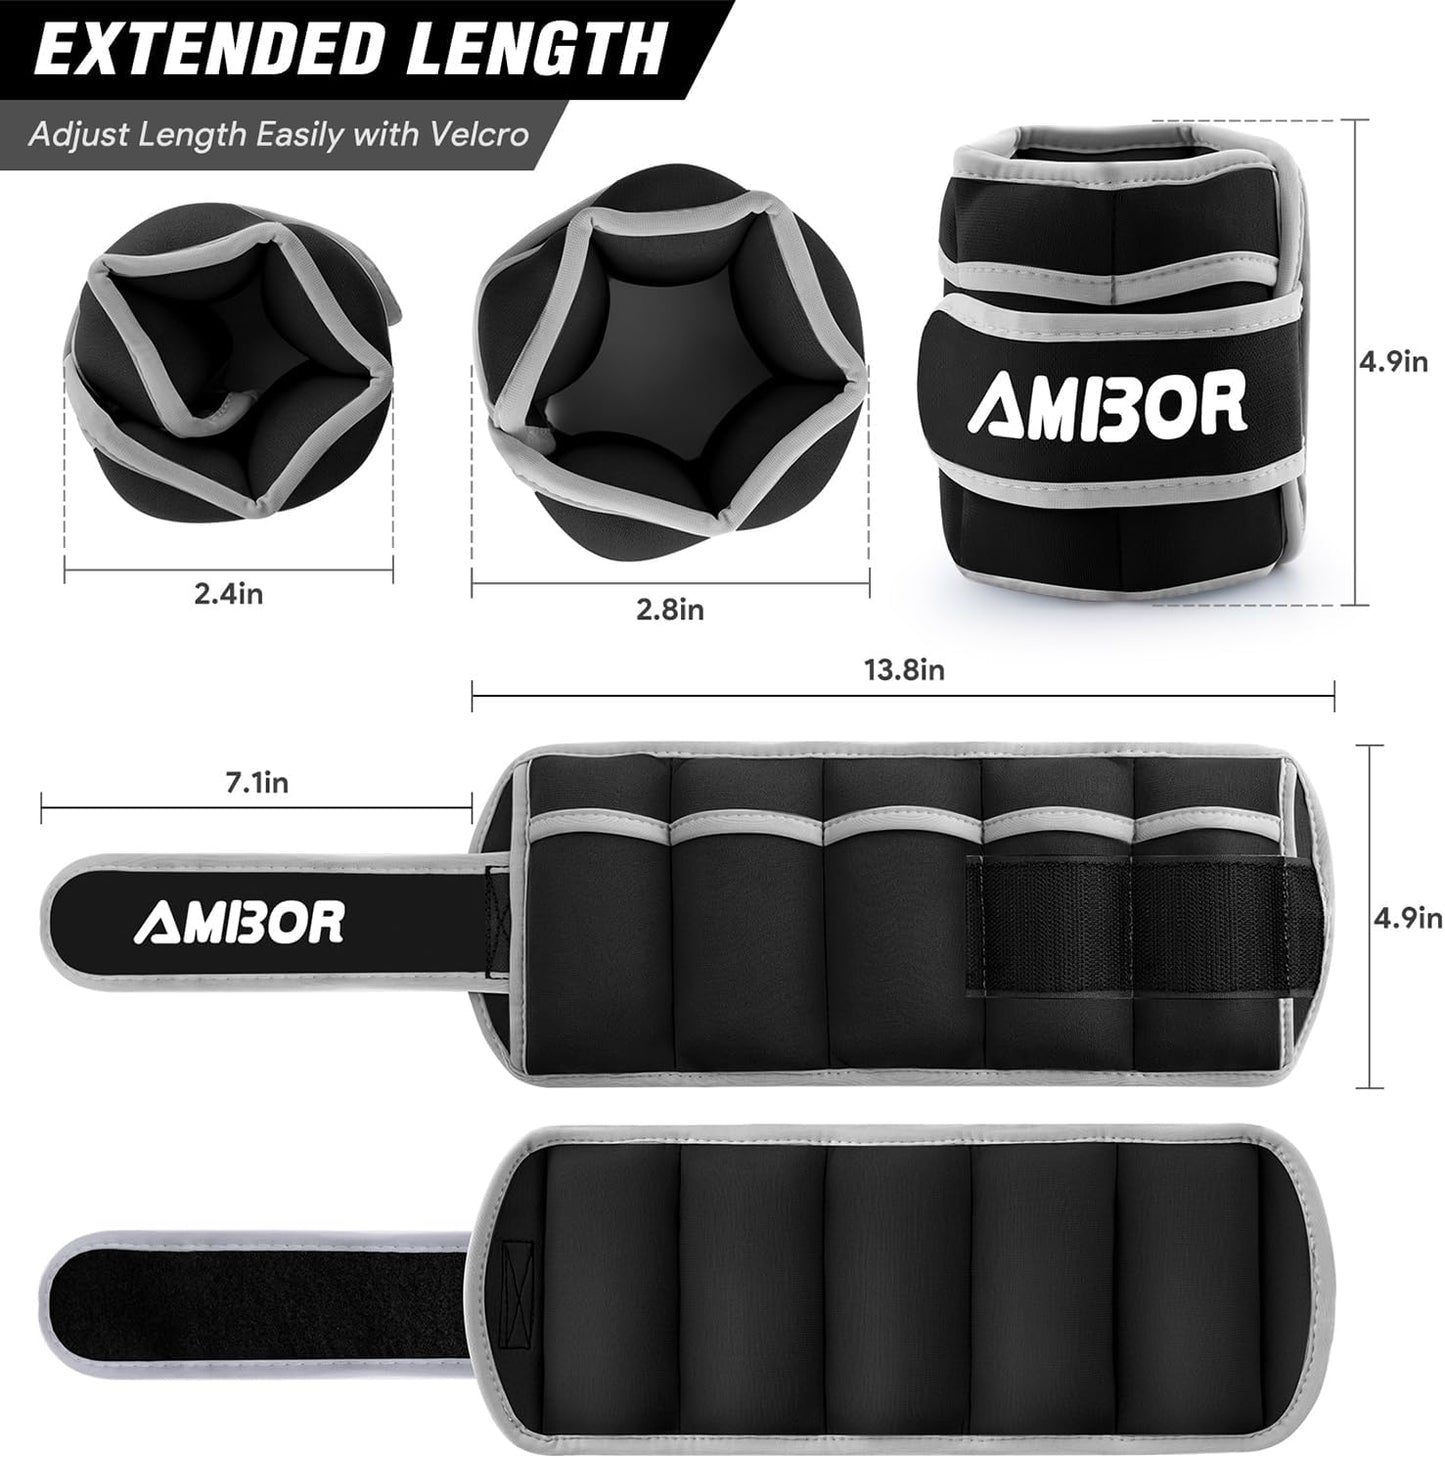 Ankle Weights, 1 Pair 2 3 4 5 Lbs Adjustable Leg Weights, Strength Training Ankle Weights for Men Women, Wrist Weights Strap Set for Walking Running Gym Fitness Workout 2 Pack